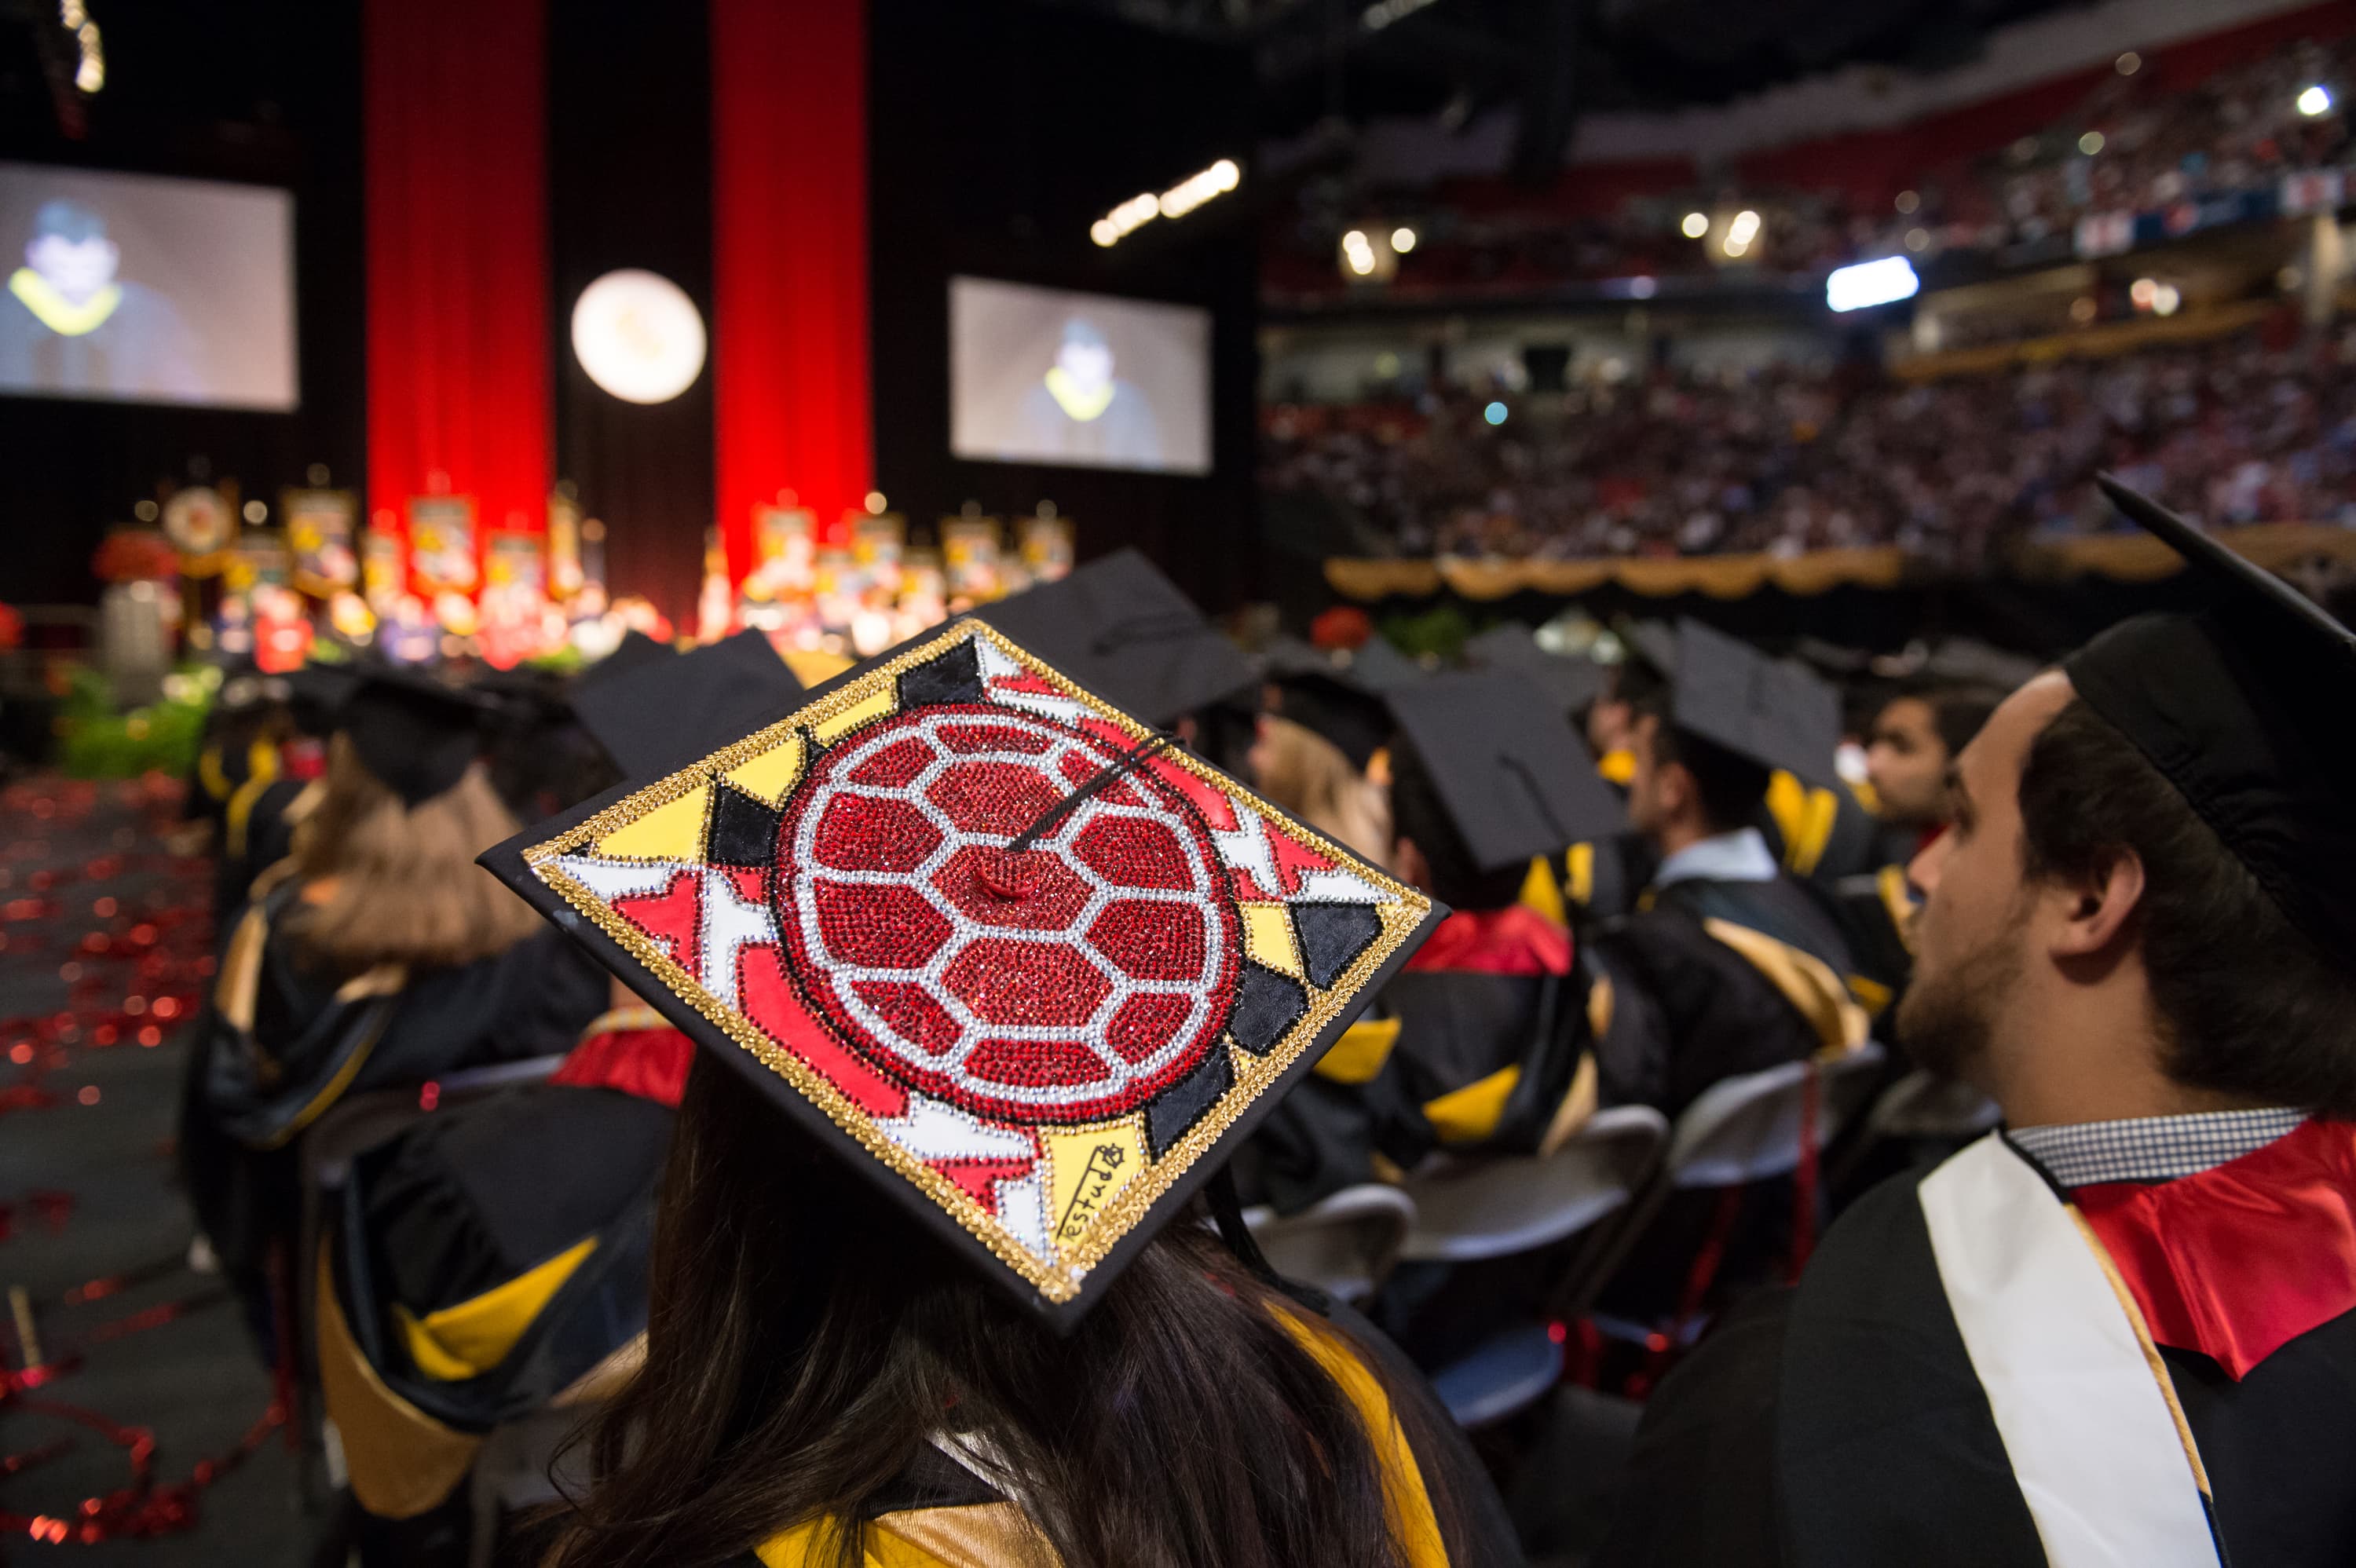 Student with Maryland-themed grad cap at commencement